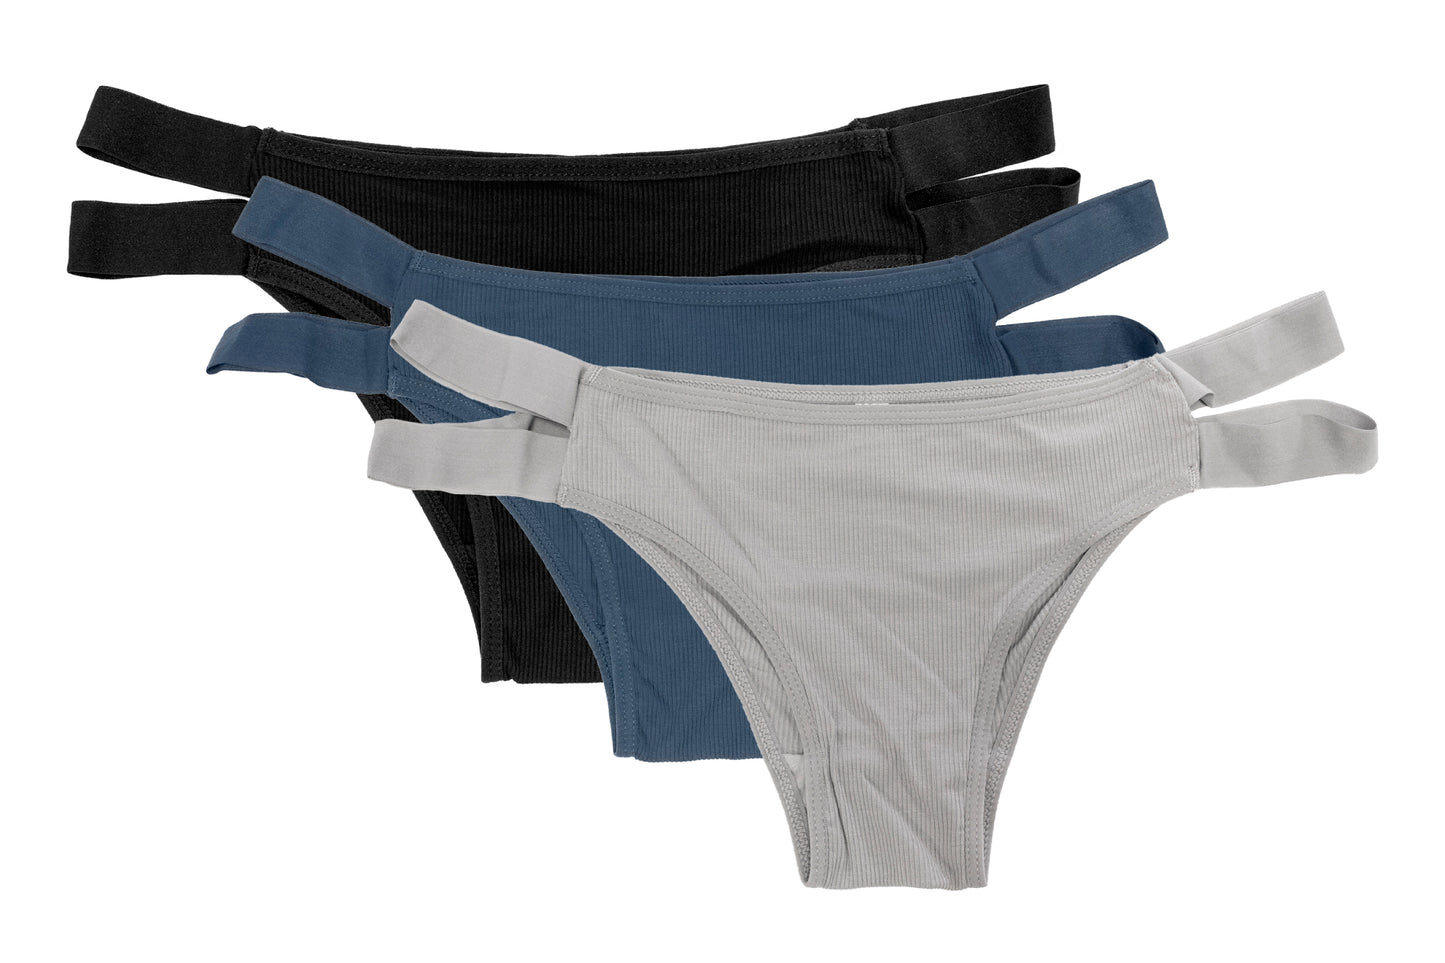 Ribbed Cheeky with Double Strap Elastic Sides 3 Pack